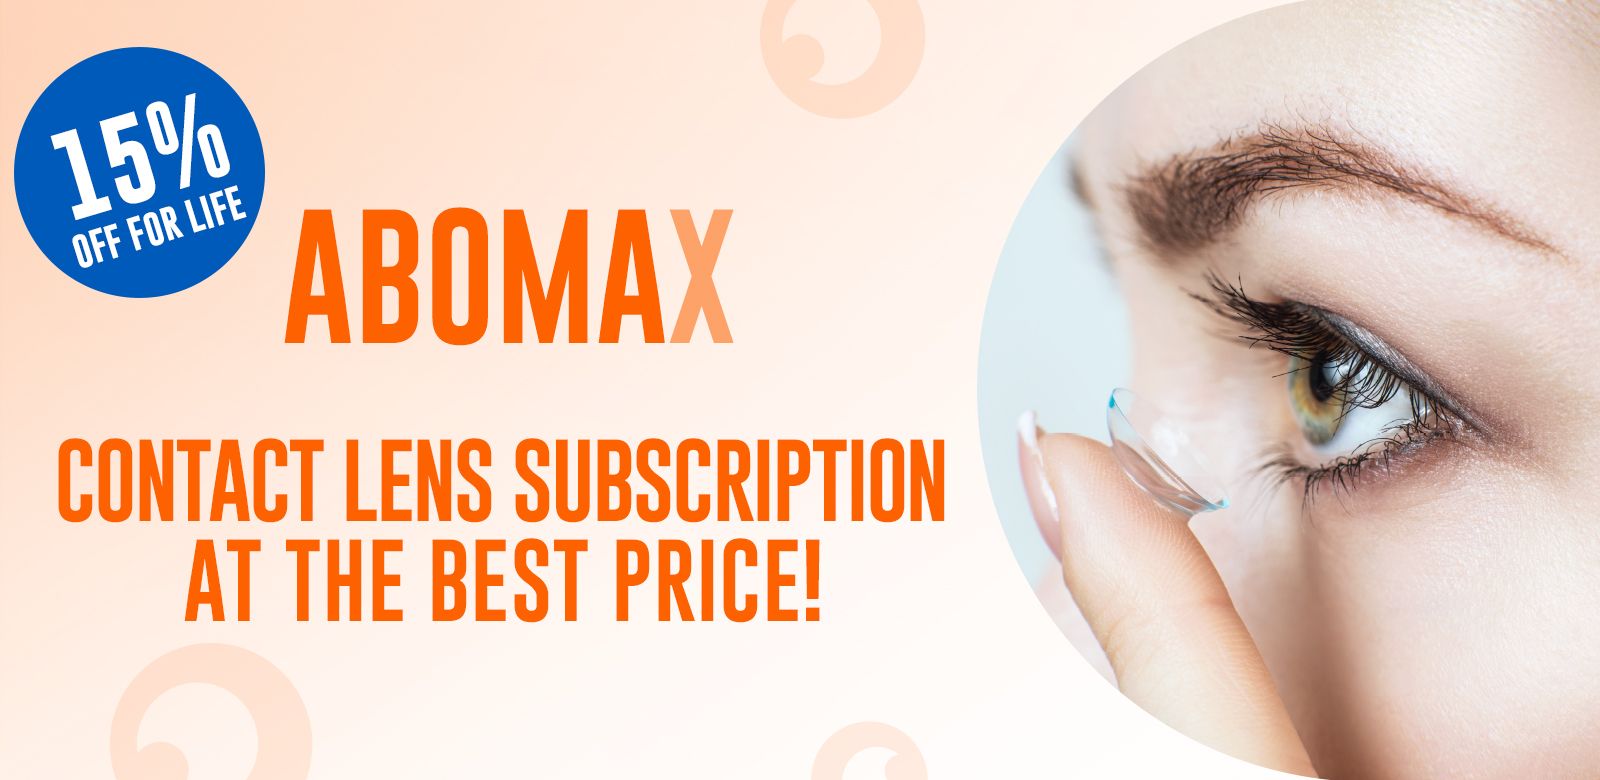 AboMax, your lens subscription